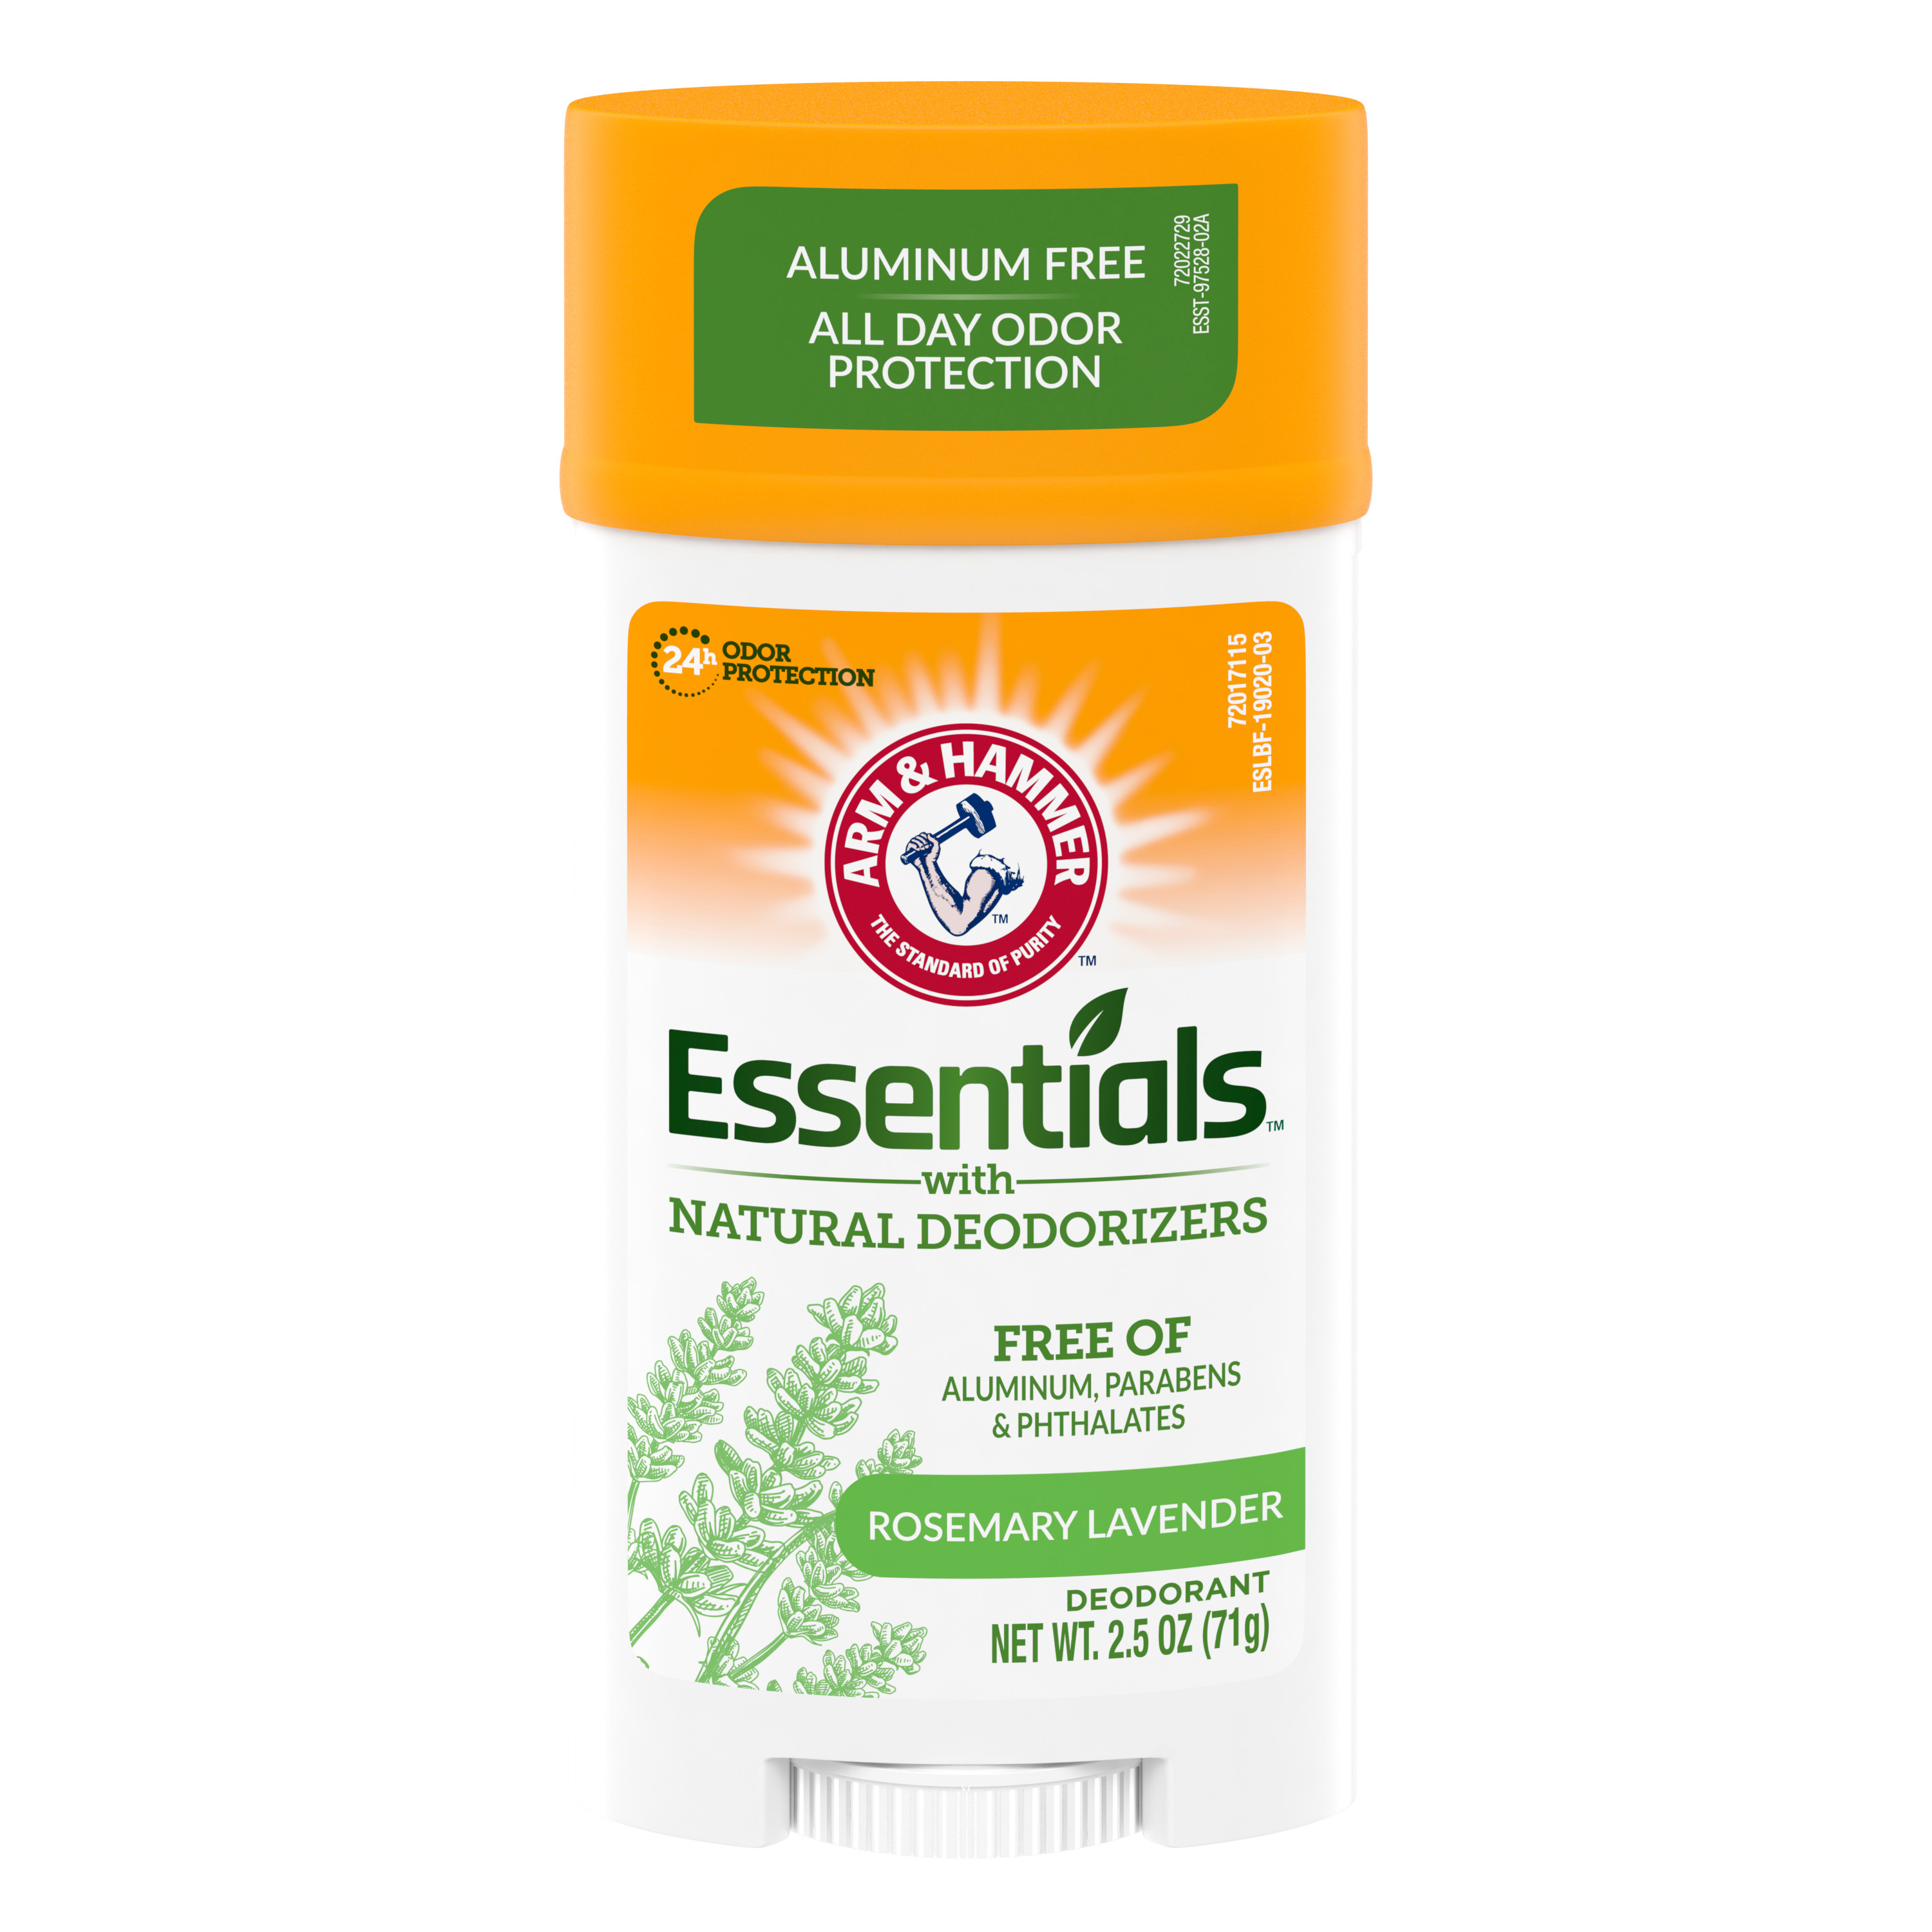 Arm & Hammer Essentials Deodorant- Fresh Rosemary Lavender- Wide Stick- 2.5oz- Made with Natural Deodorizers- Free From Aluminum, Parabens  Phthalates - image 1 of 7